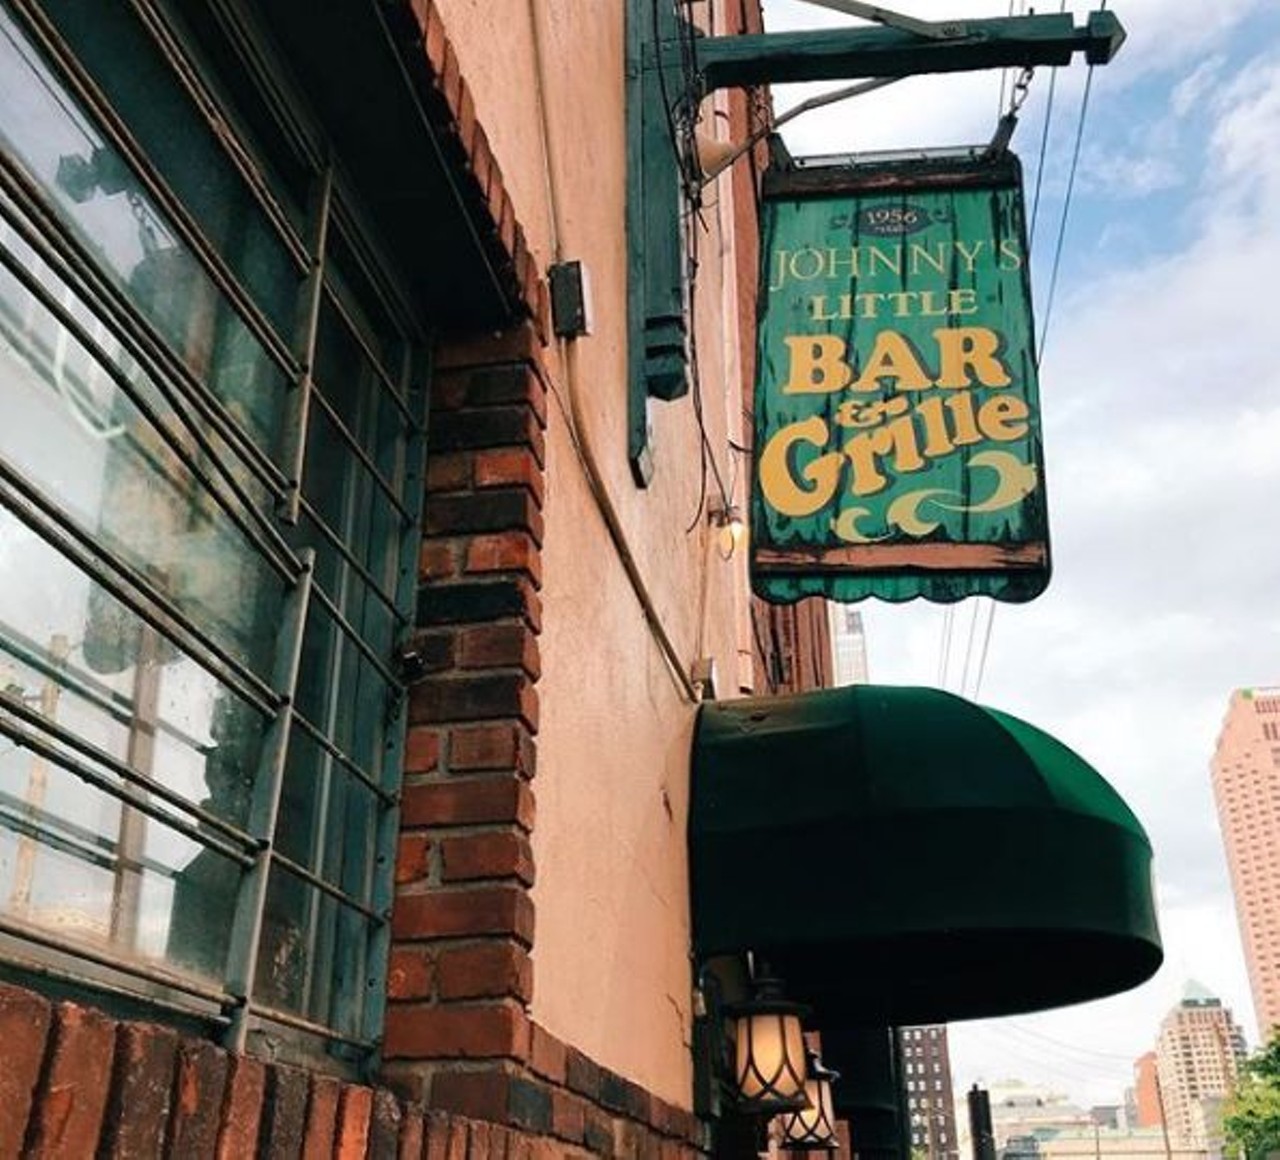  Johnny&#146;s Little Bar & Grille
614 Frankfort Ave., (216) 861-2166
Until 2:30 a.m., this casual, cozy joint is jumpin&#146; with classic bar fare, Italian dishes and more than 40 beers, all hidden in the Warehouse District.
Photo via clevelandvibes/Instagram